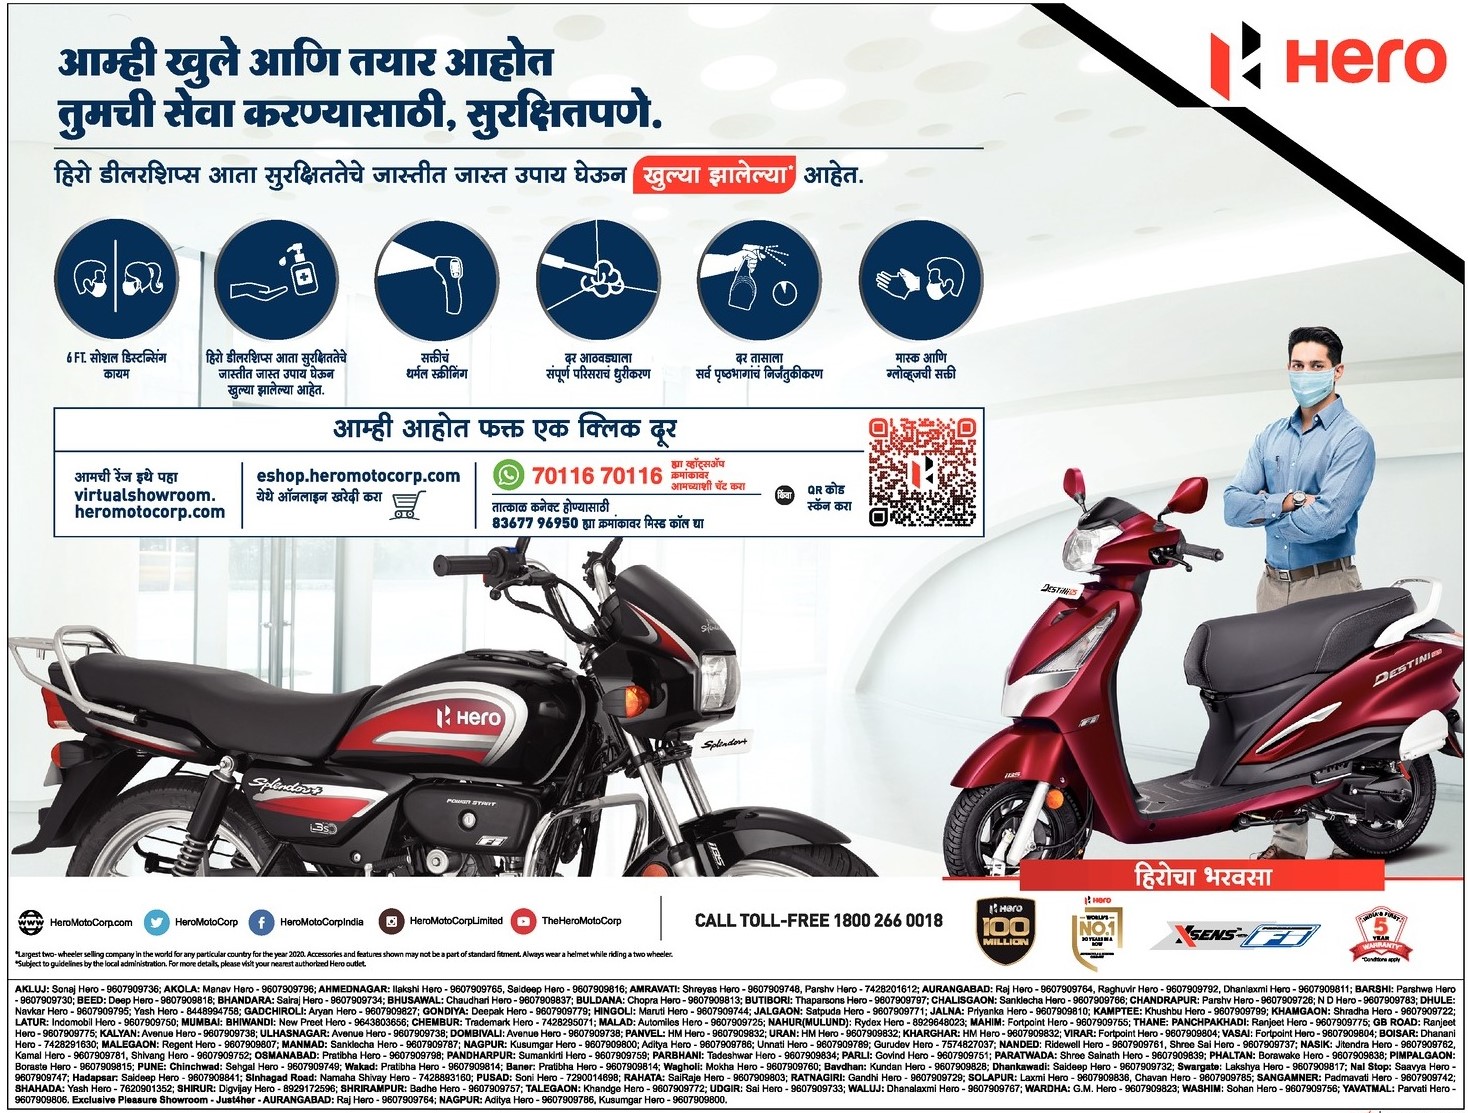 hero-we-are-open-and-ready-for-your-service-ad-lokmat-mumbai-11-06-2021